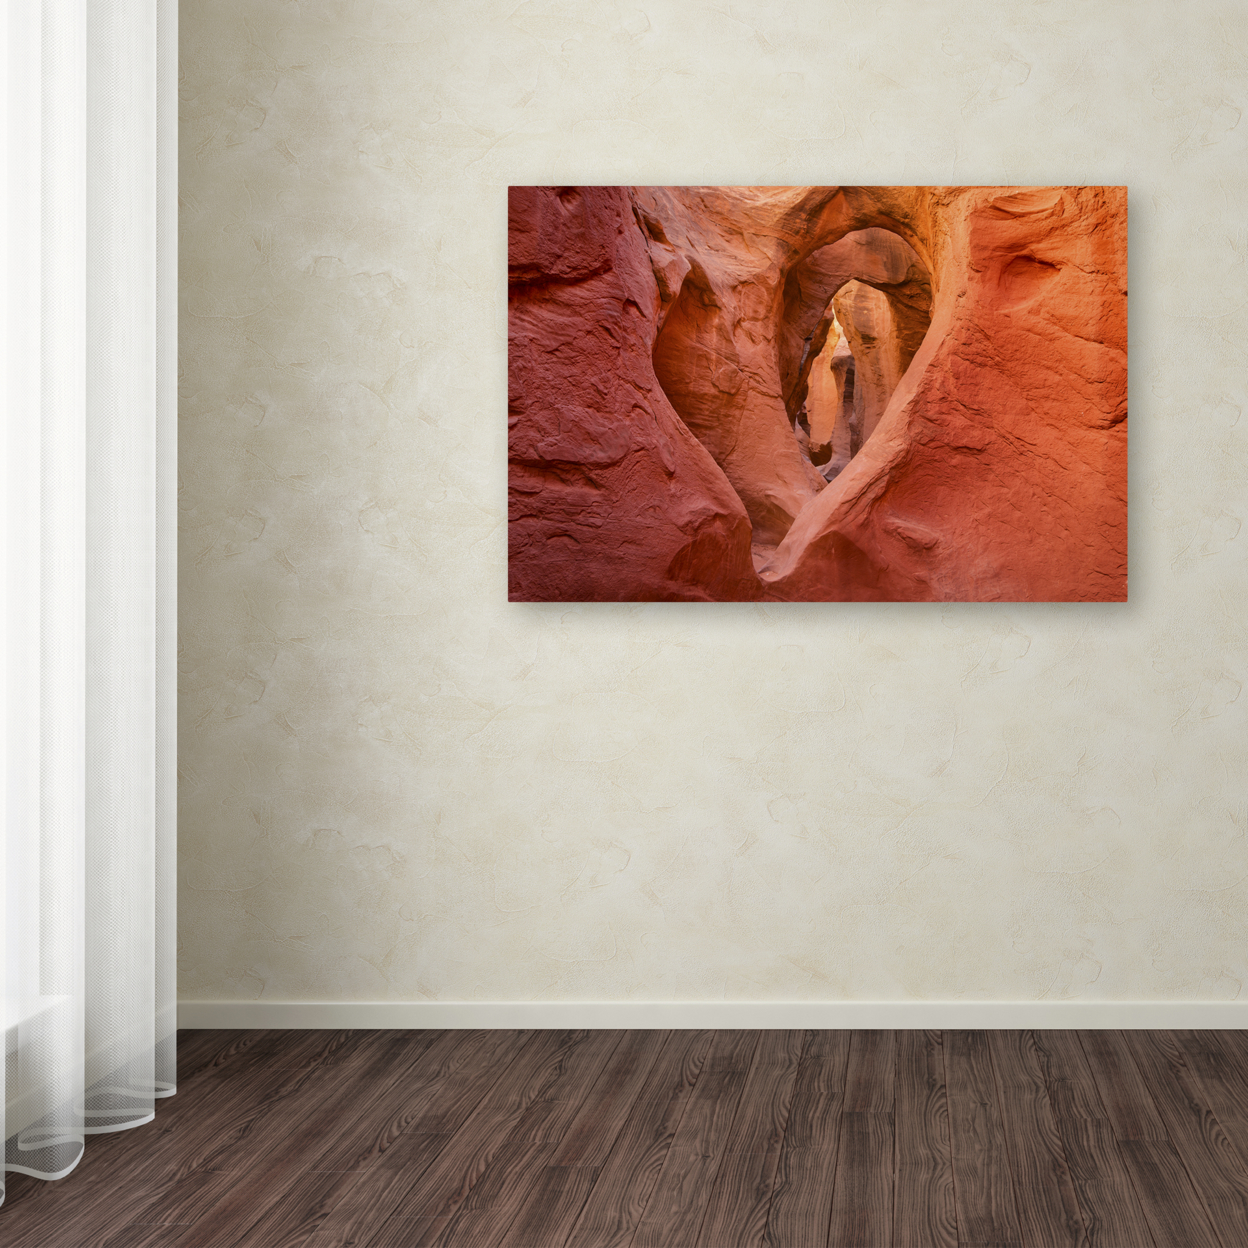 Michael Blanchette Photography 'Heart In Stone' Canvas Art 16 X 24